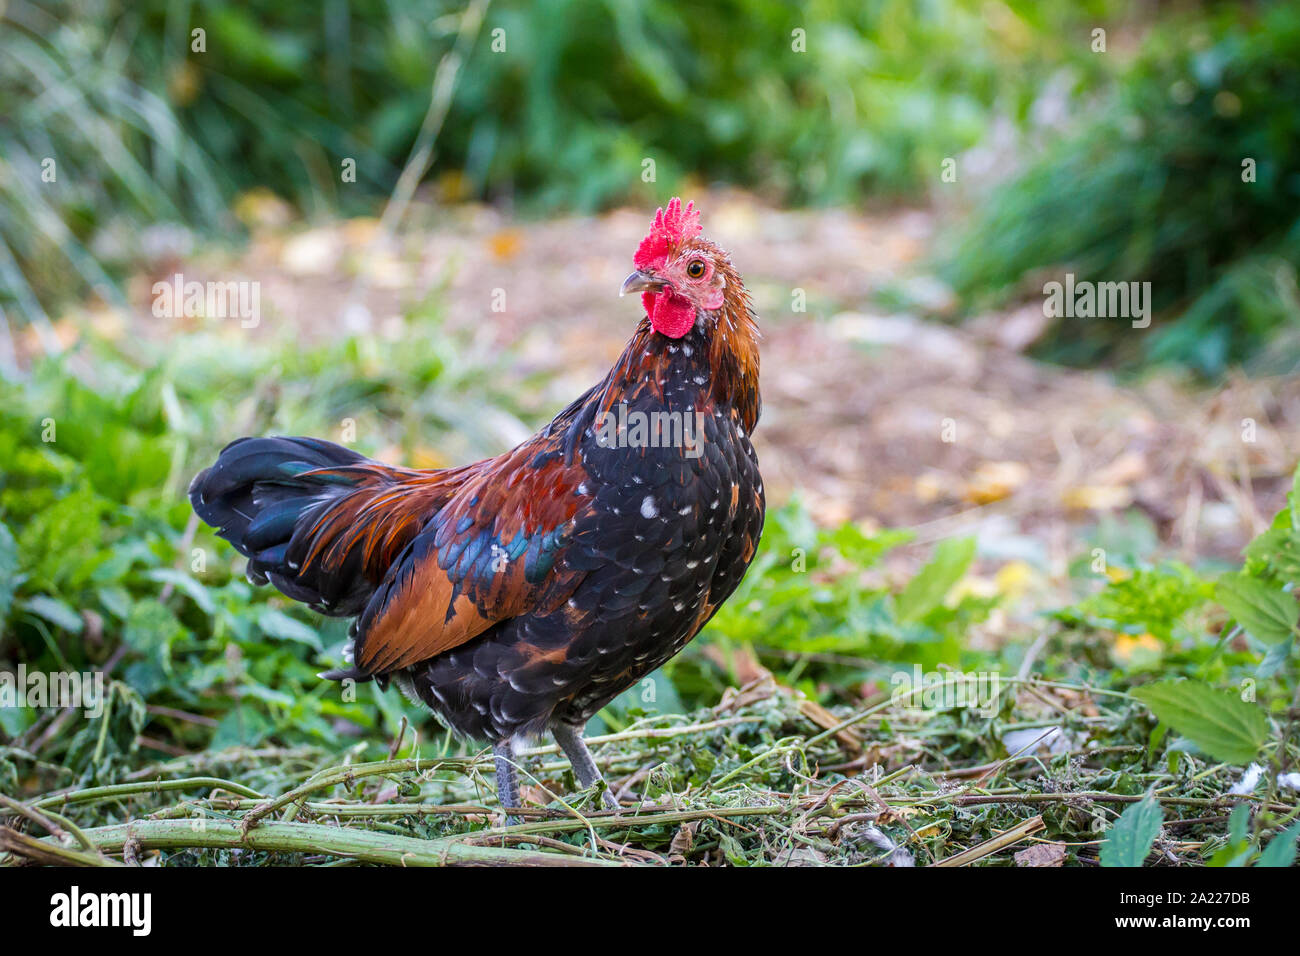 Young Steinhendl/ Stoapiperl rooster - an endangered chicken breed from Austria Stock Photo